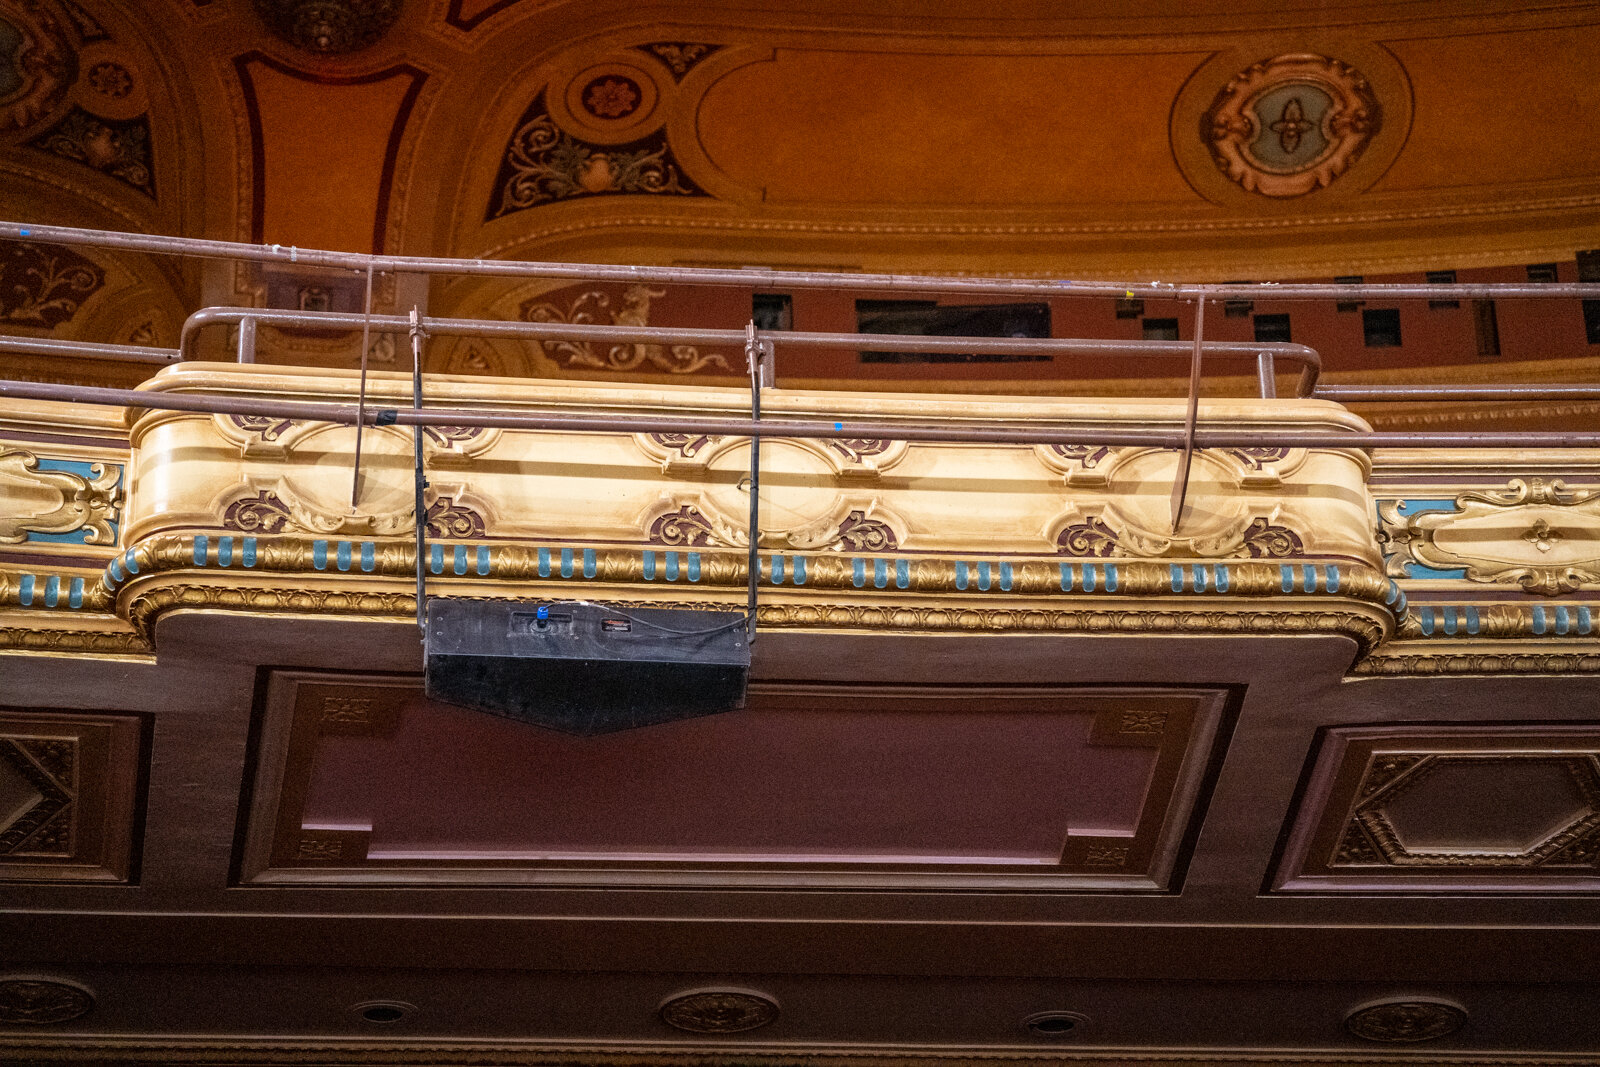  Historic restoration of the balcony trim in Sheas theatre, located in downtown Buffalo New York. 